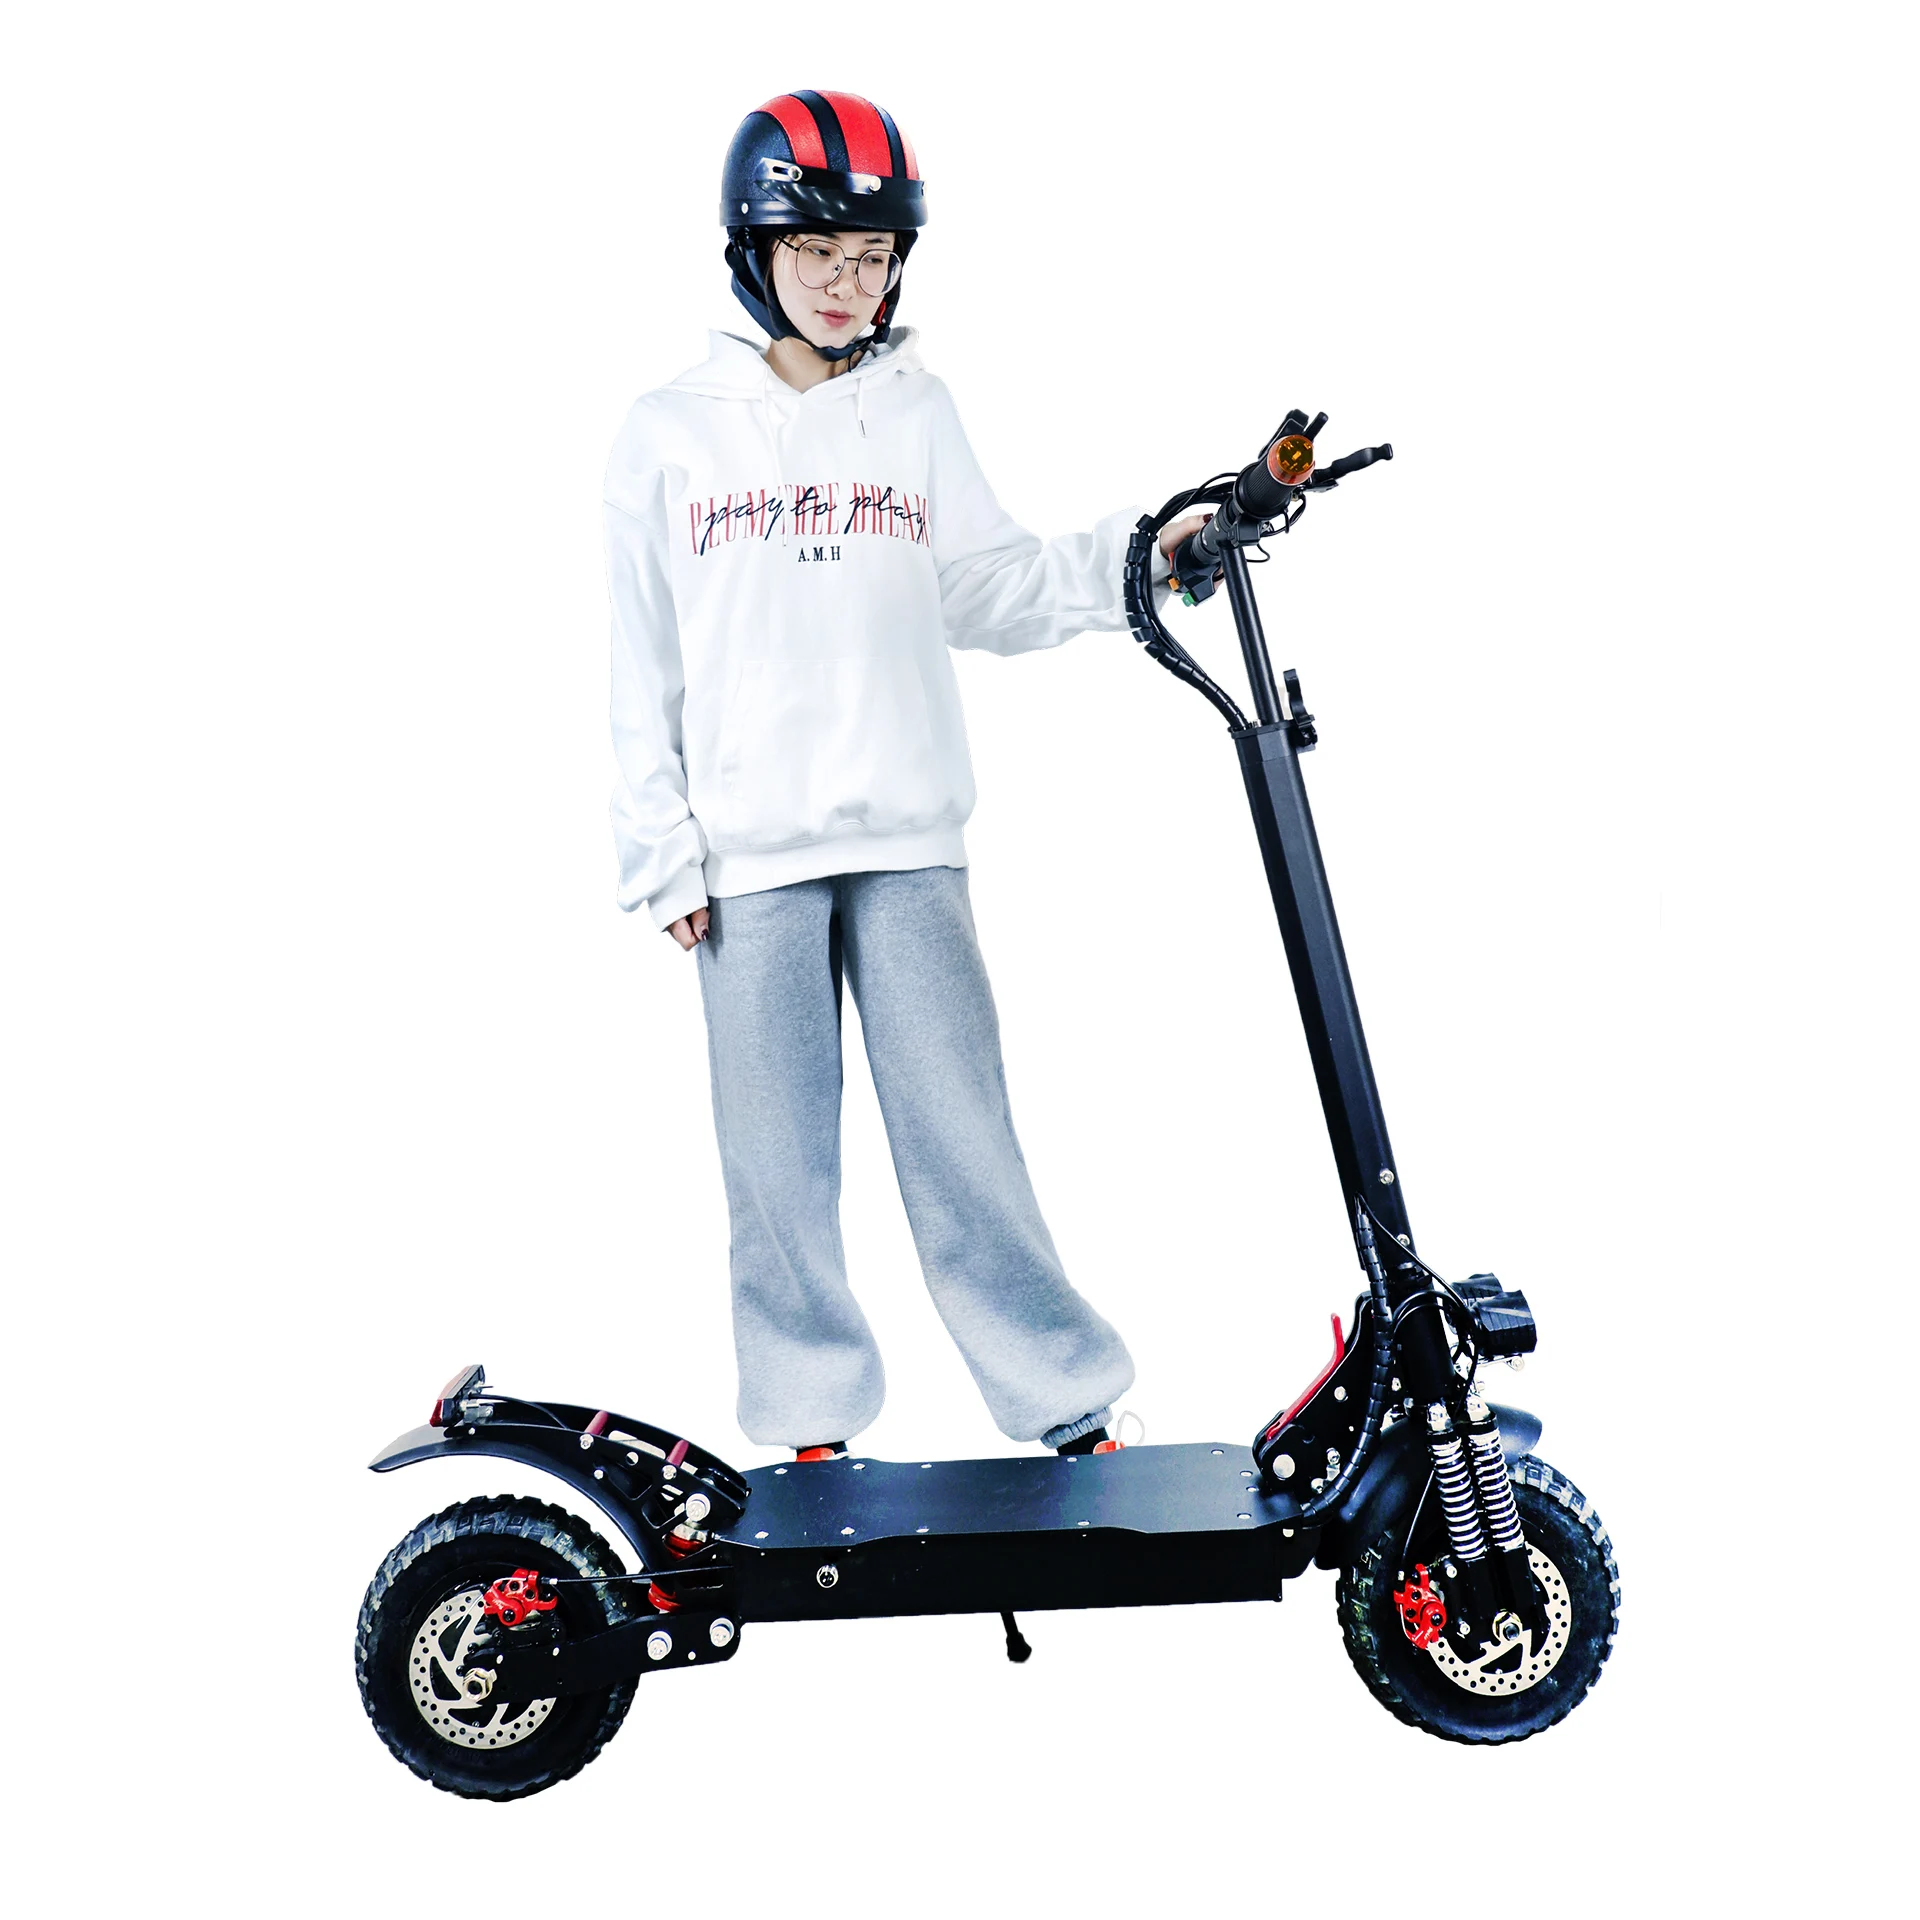 52V 2000W 4000W Electric Scooter Dual Motor Brushless Bike Motorcycle Scooter With Off Road Tires